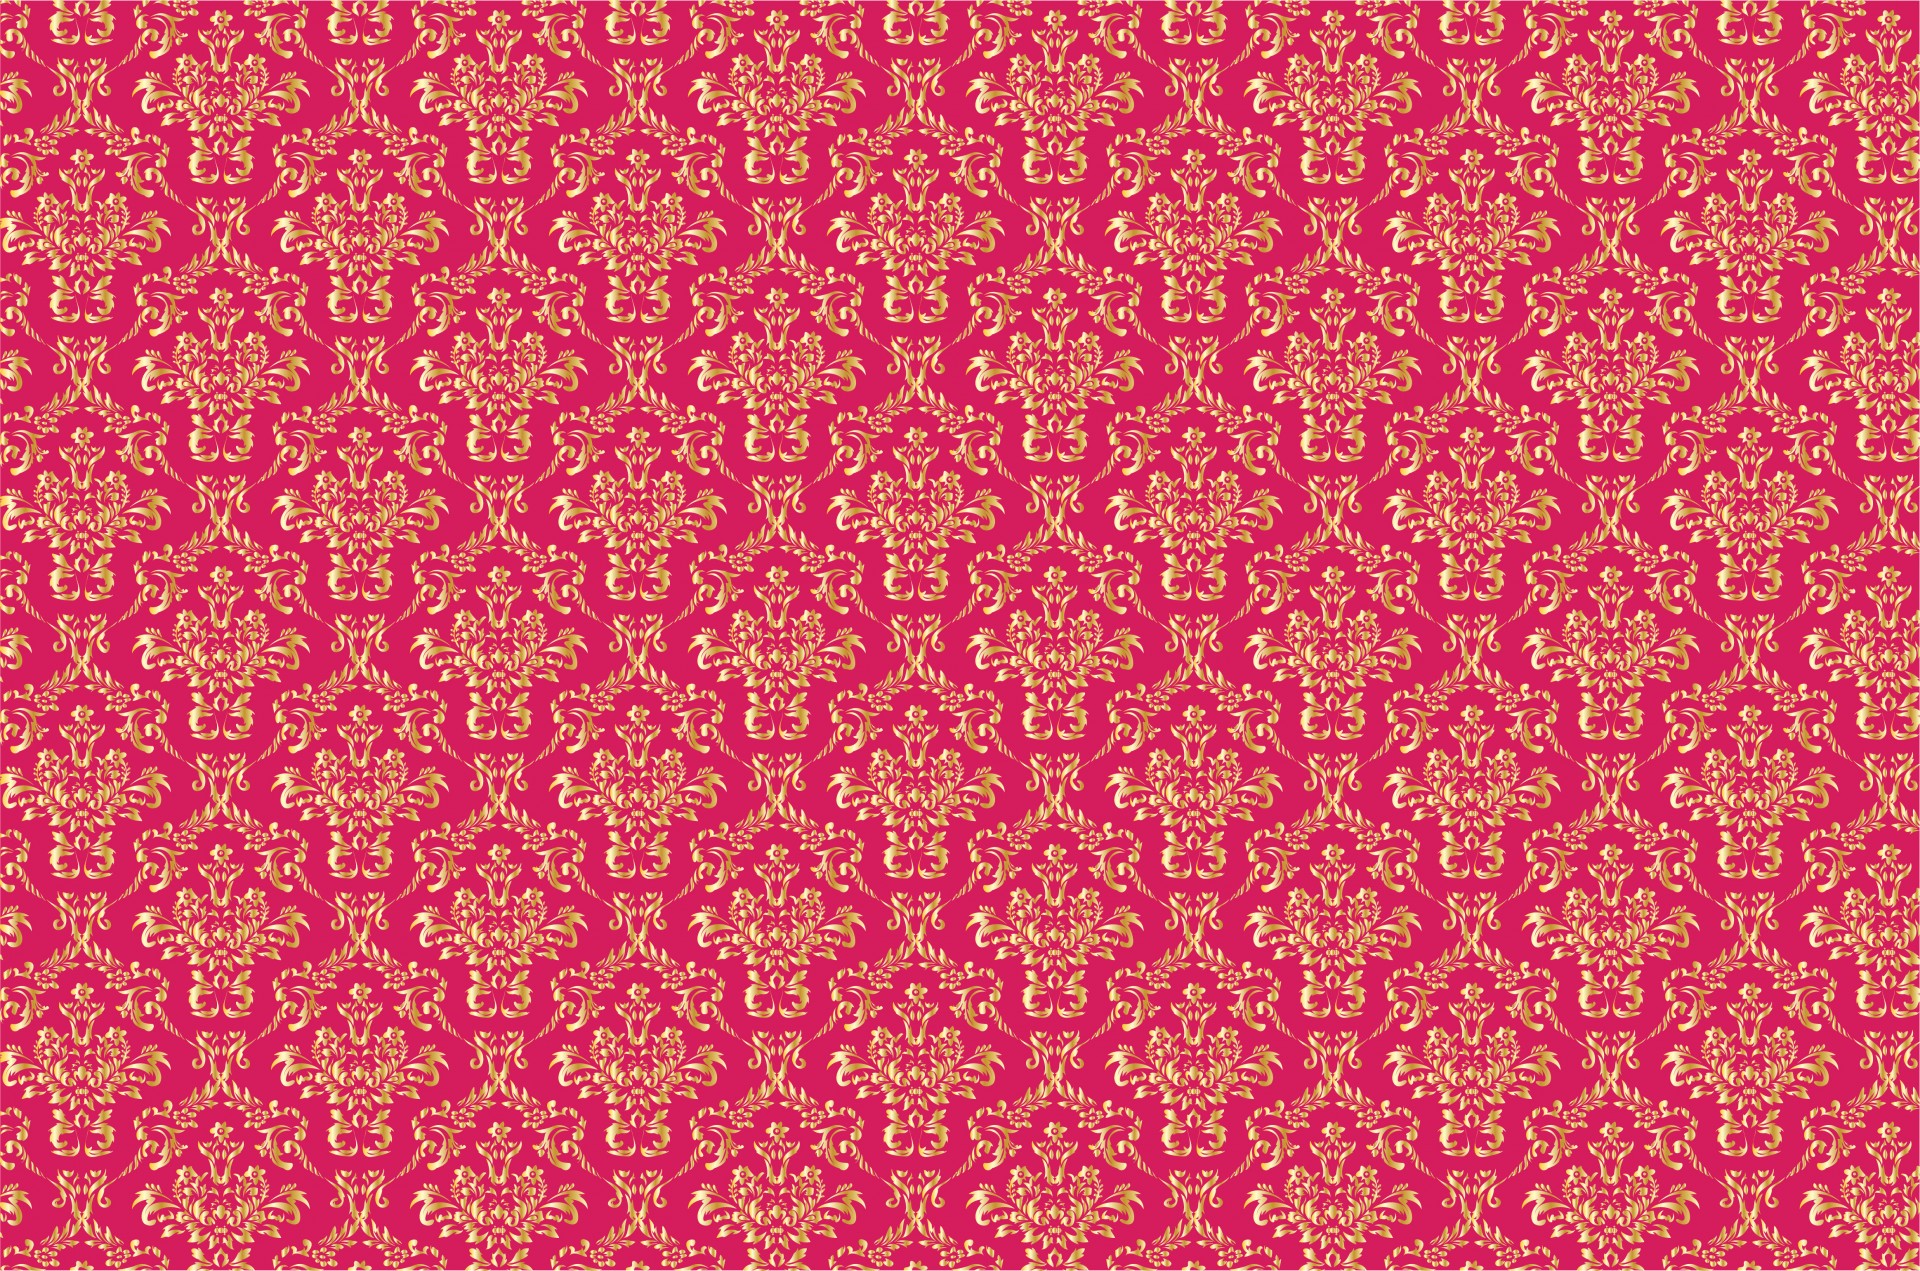 Damask pattern background in gold and pink for scrapbooking